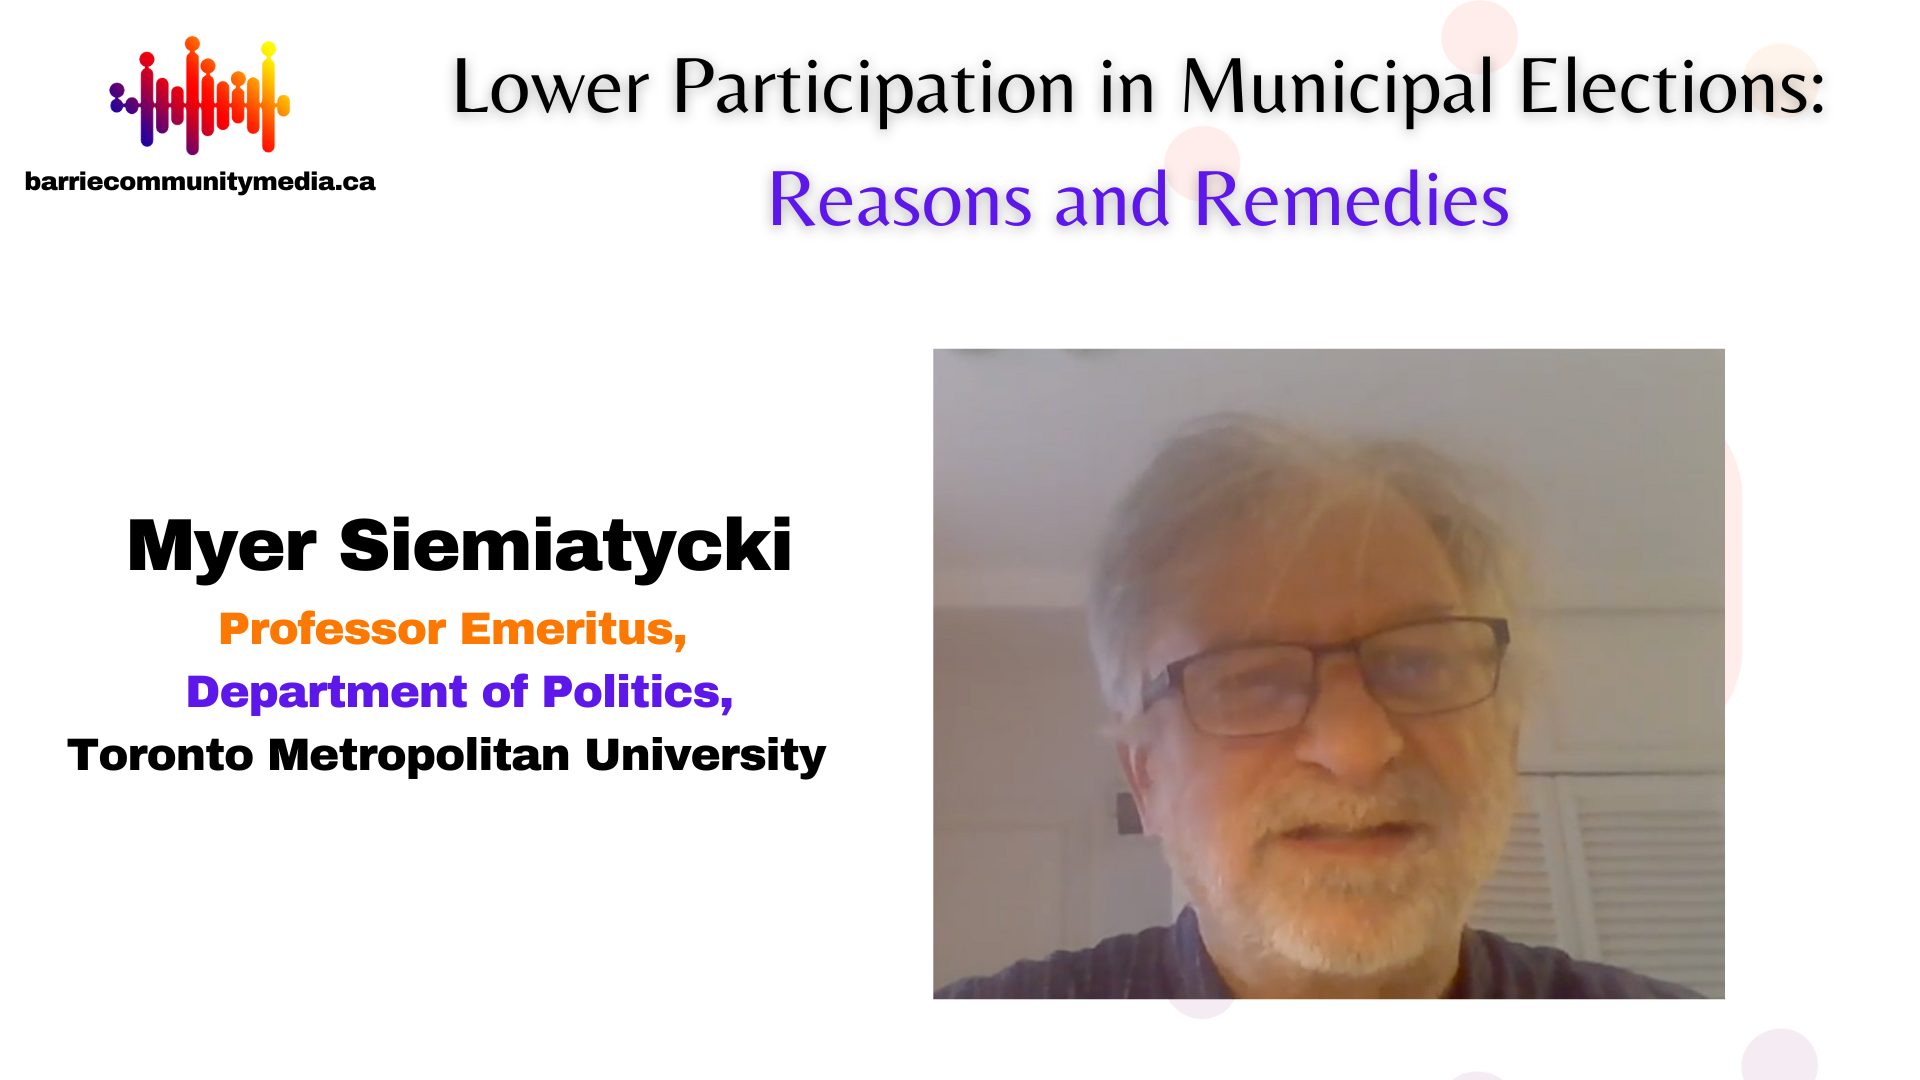 Lower Participation in Municipal Elections: Reasons and Remedies